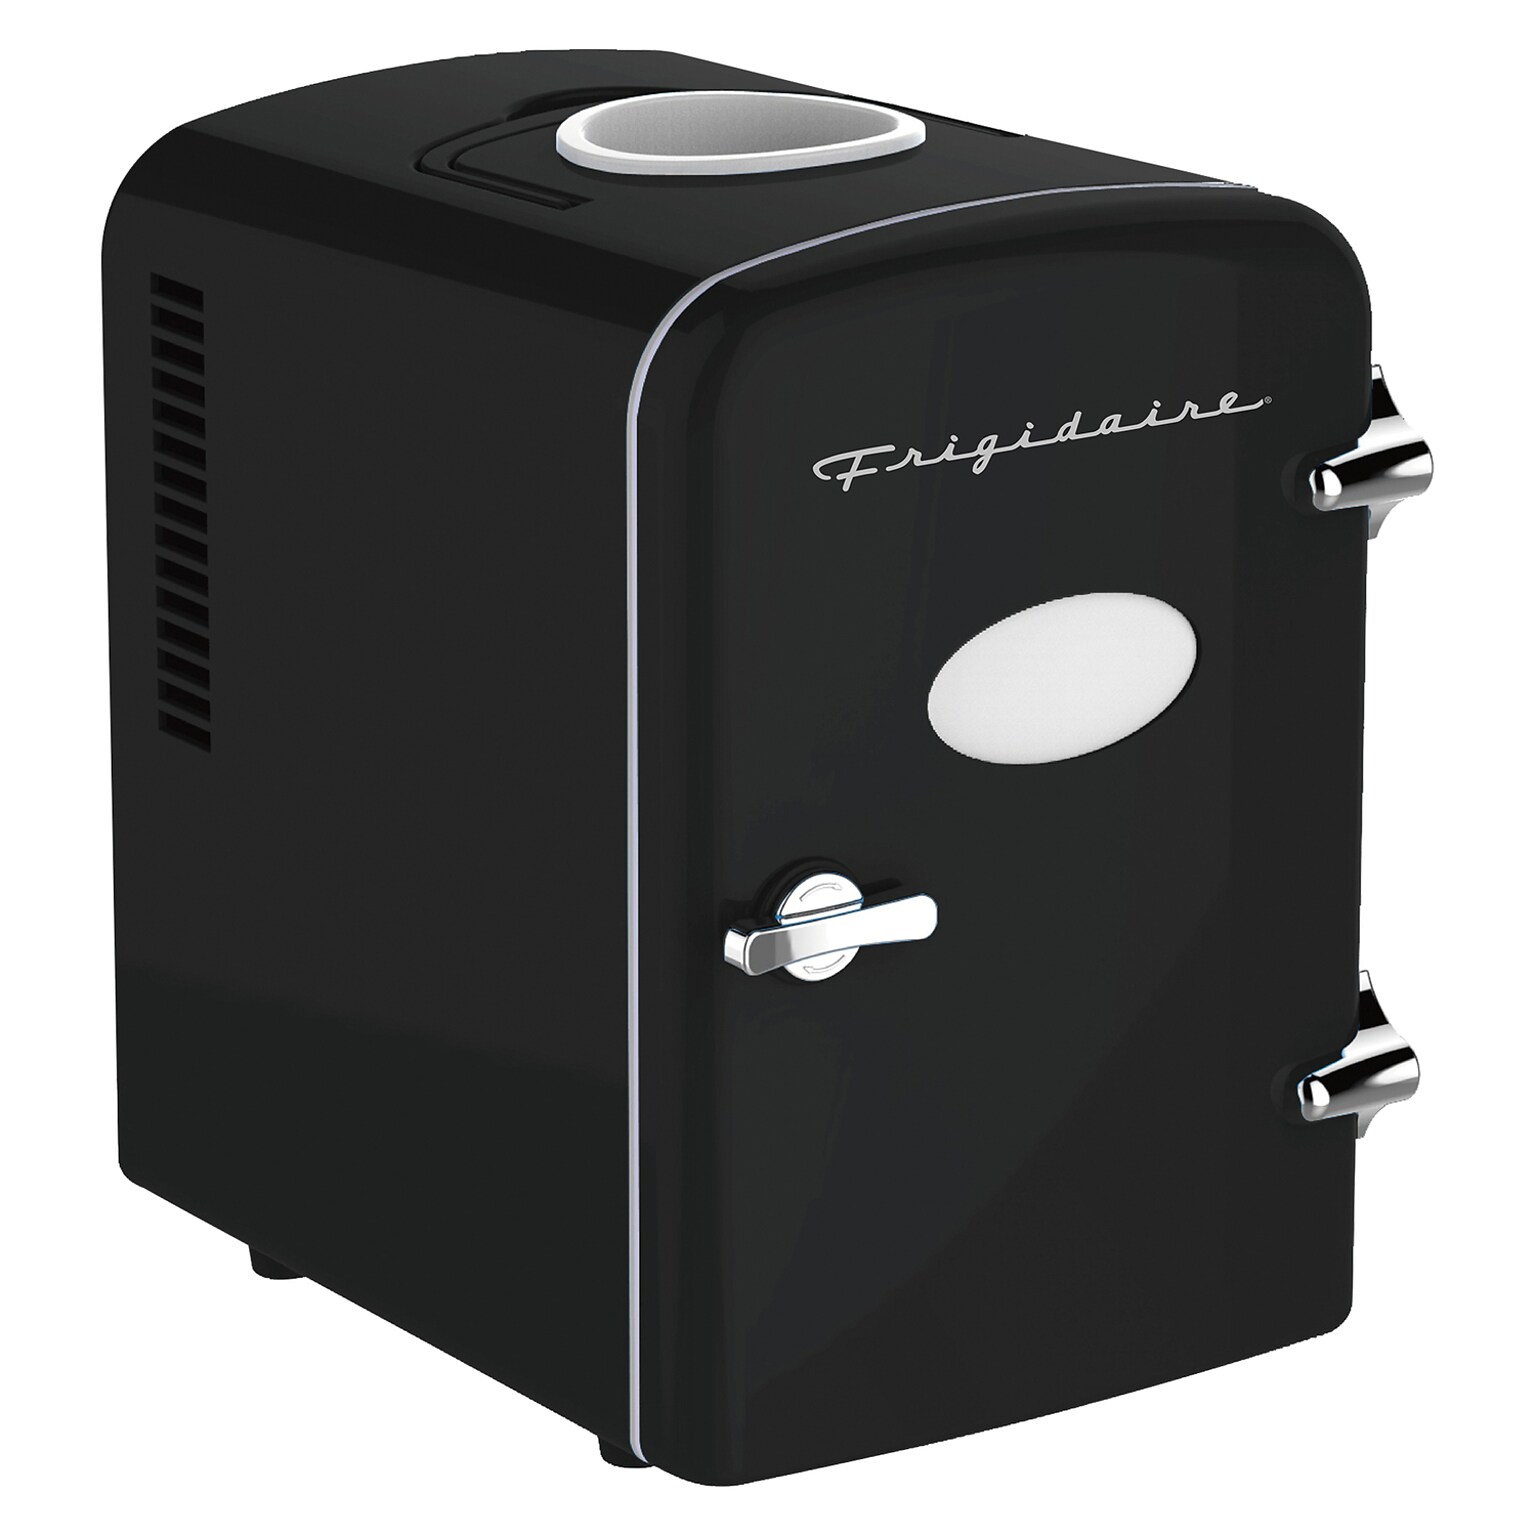 Frigidaire Retro 6+1-Can Mini Portable Fridge with Top-Mounted Active-Cooling Can Holder, Black (EFMIS171-BLACK)